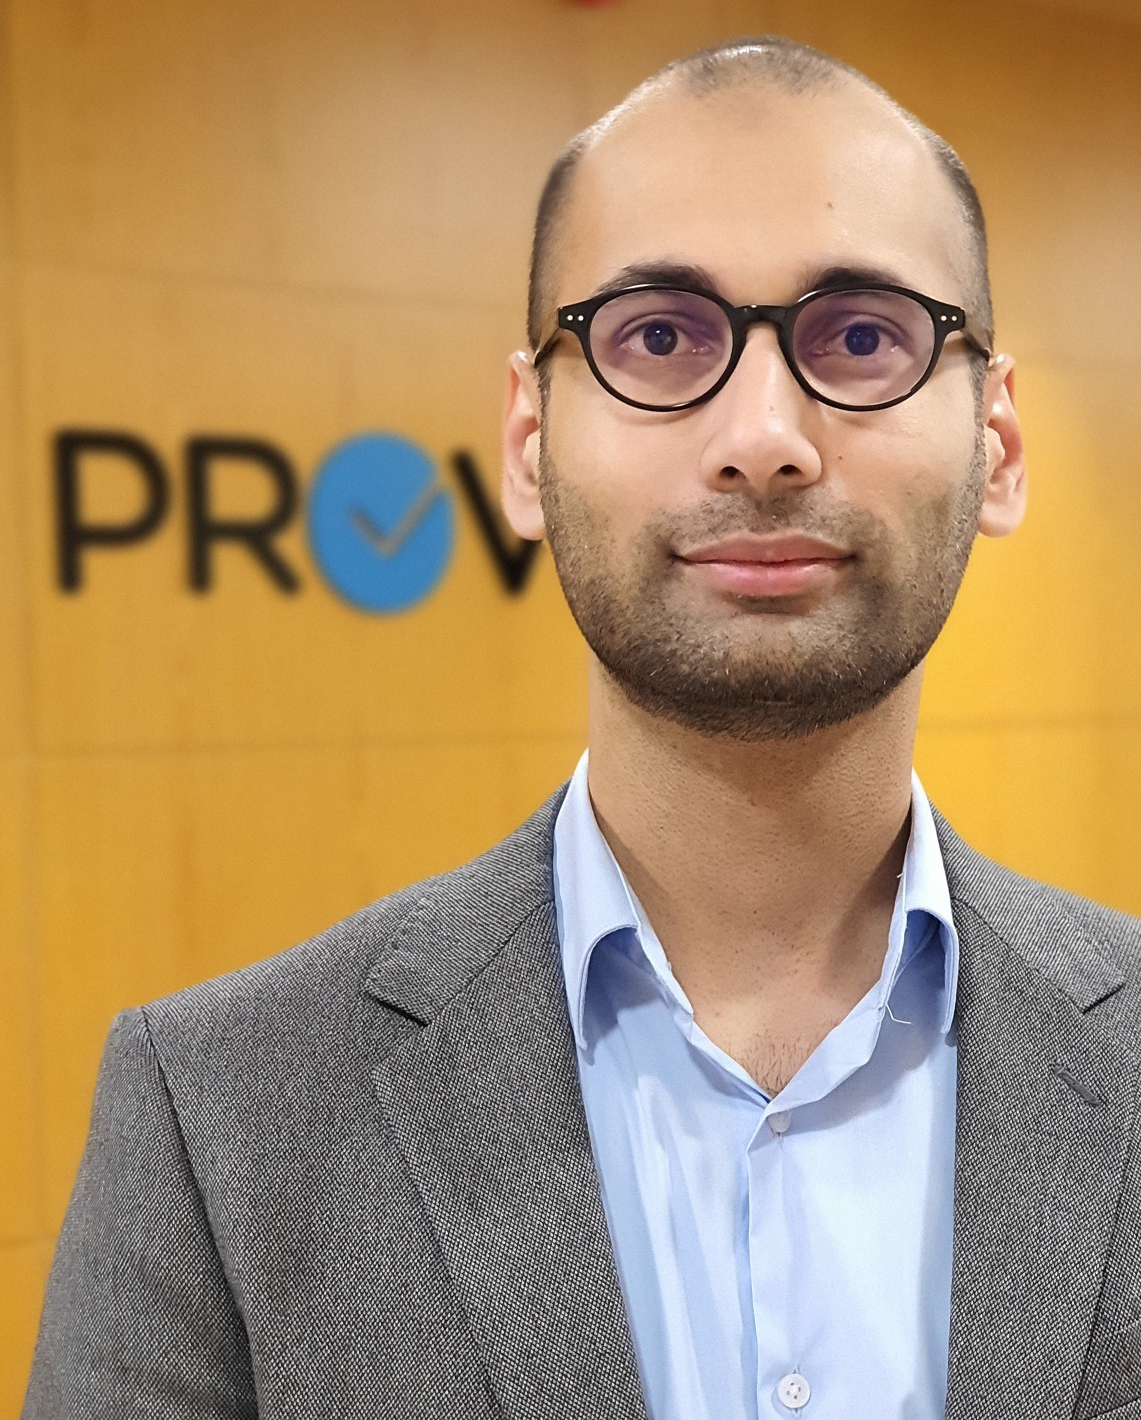 Omer Saleem, director and deputy CEO of Proven